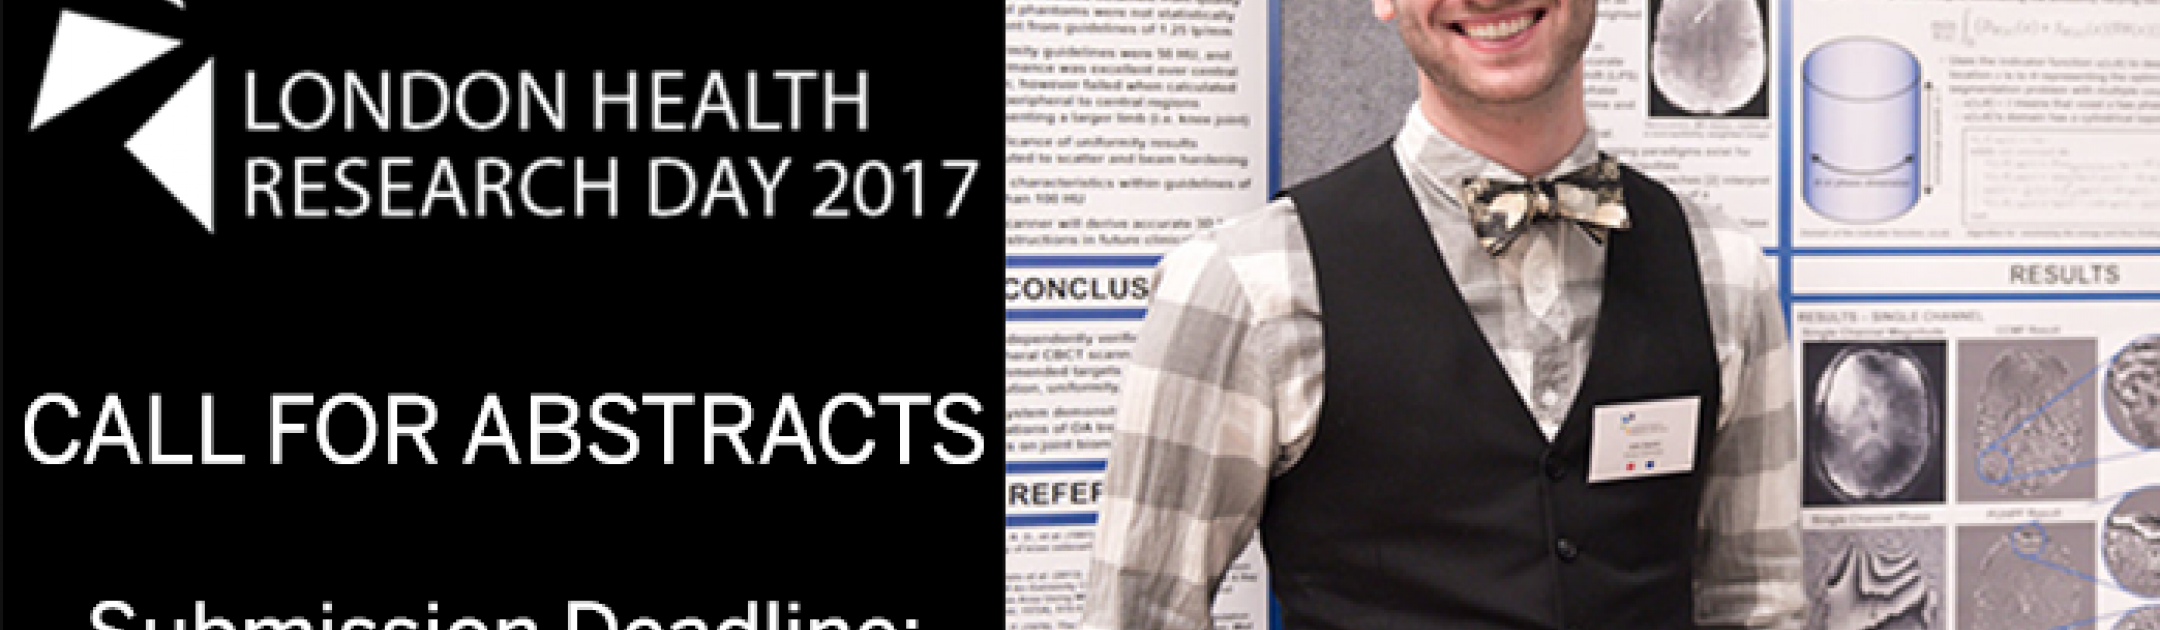 London Health Research Day Call for Abstracts promo